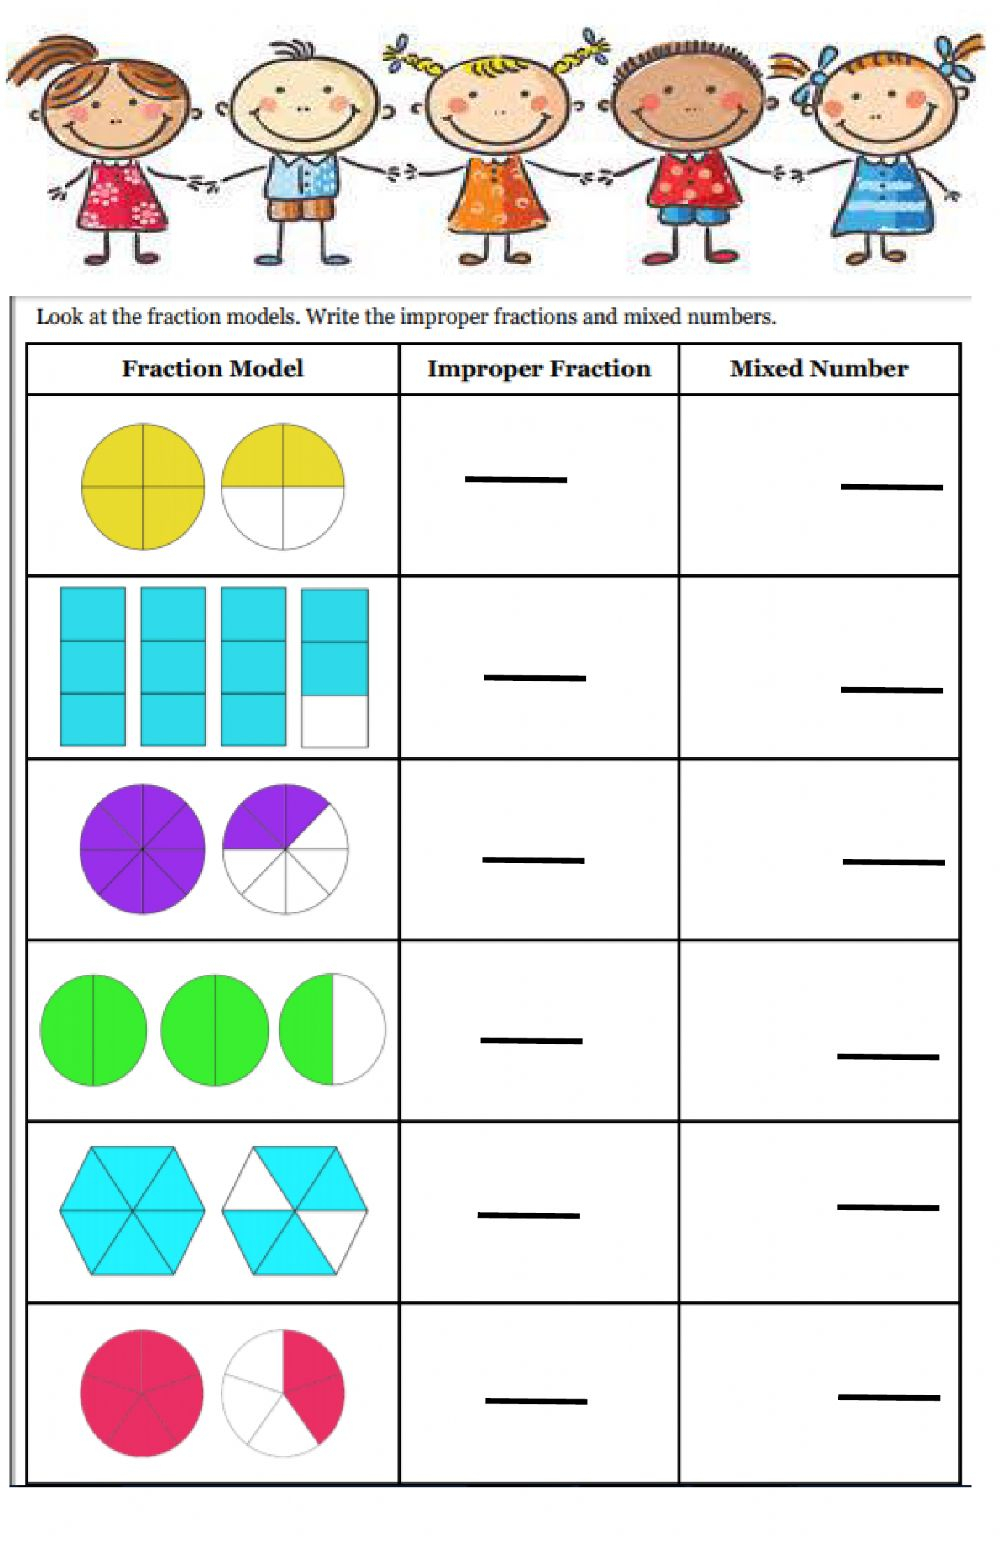 mixed-numbers-and-improper-fractions-worksheet-3rd-grade-2022-numbersworksheets